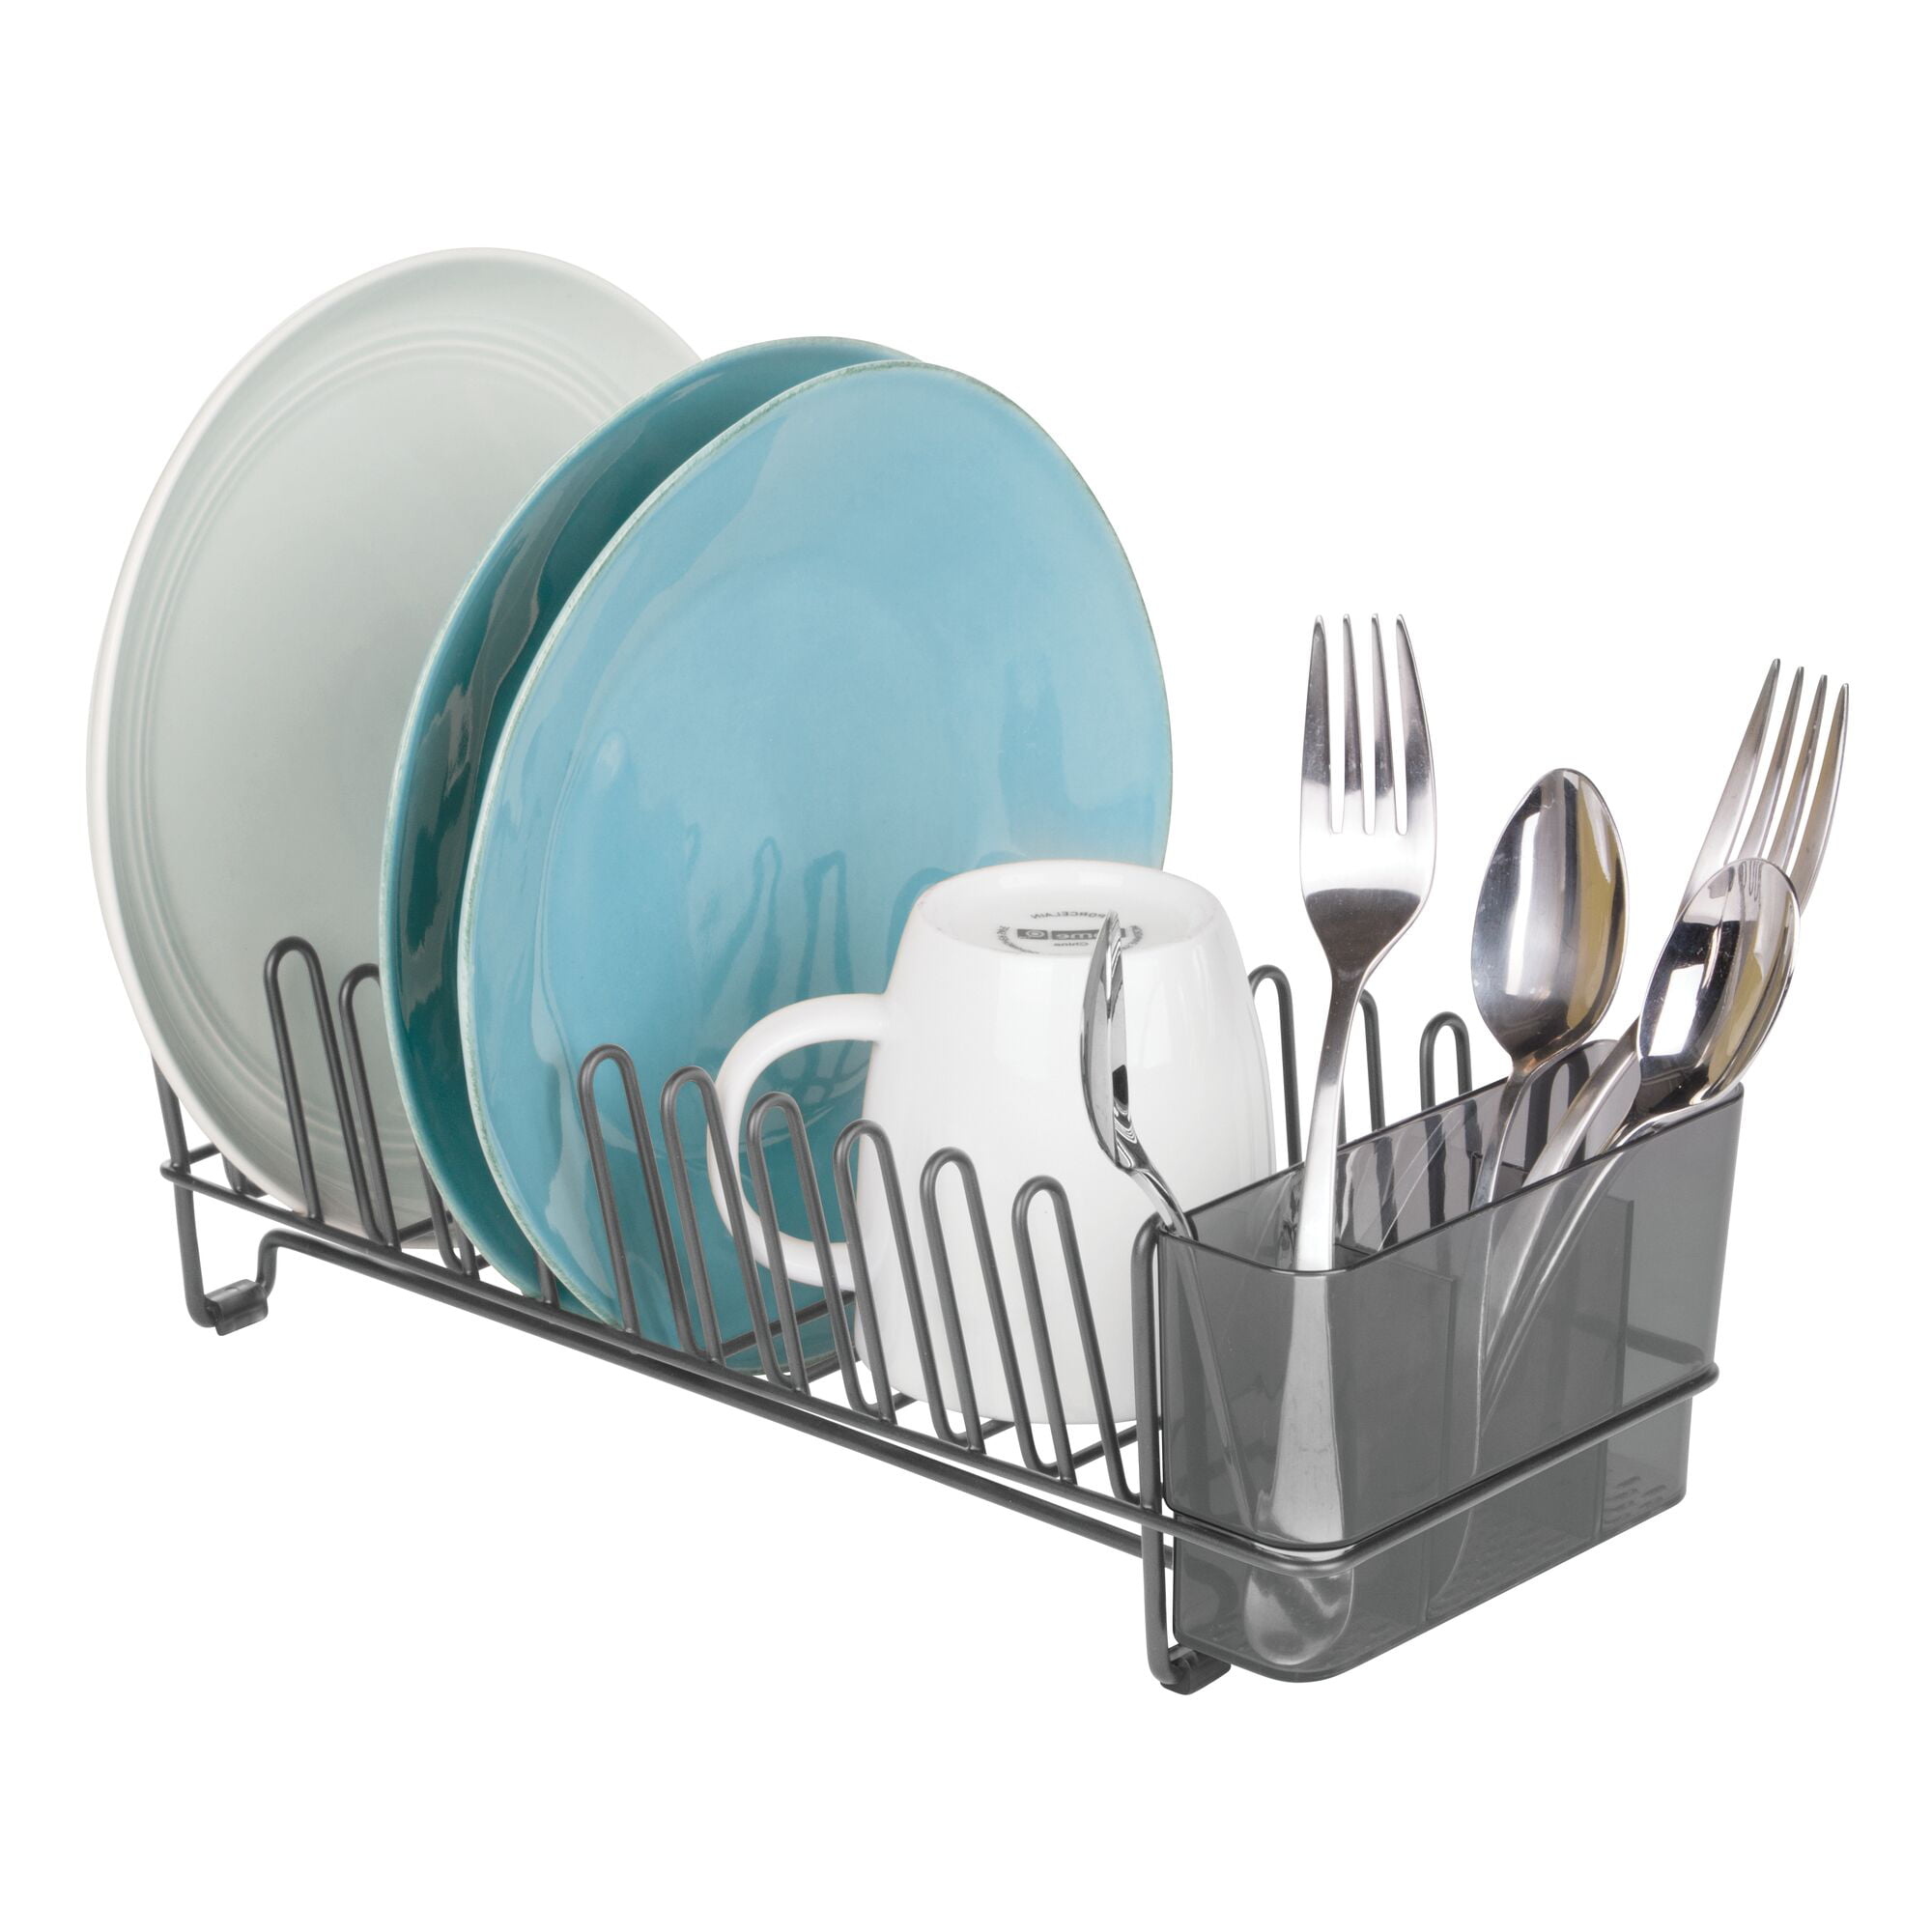 Chrome/Clear Compact Metal Kitchen Sink Dish Drying Rack by mDesign